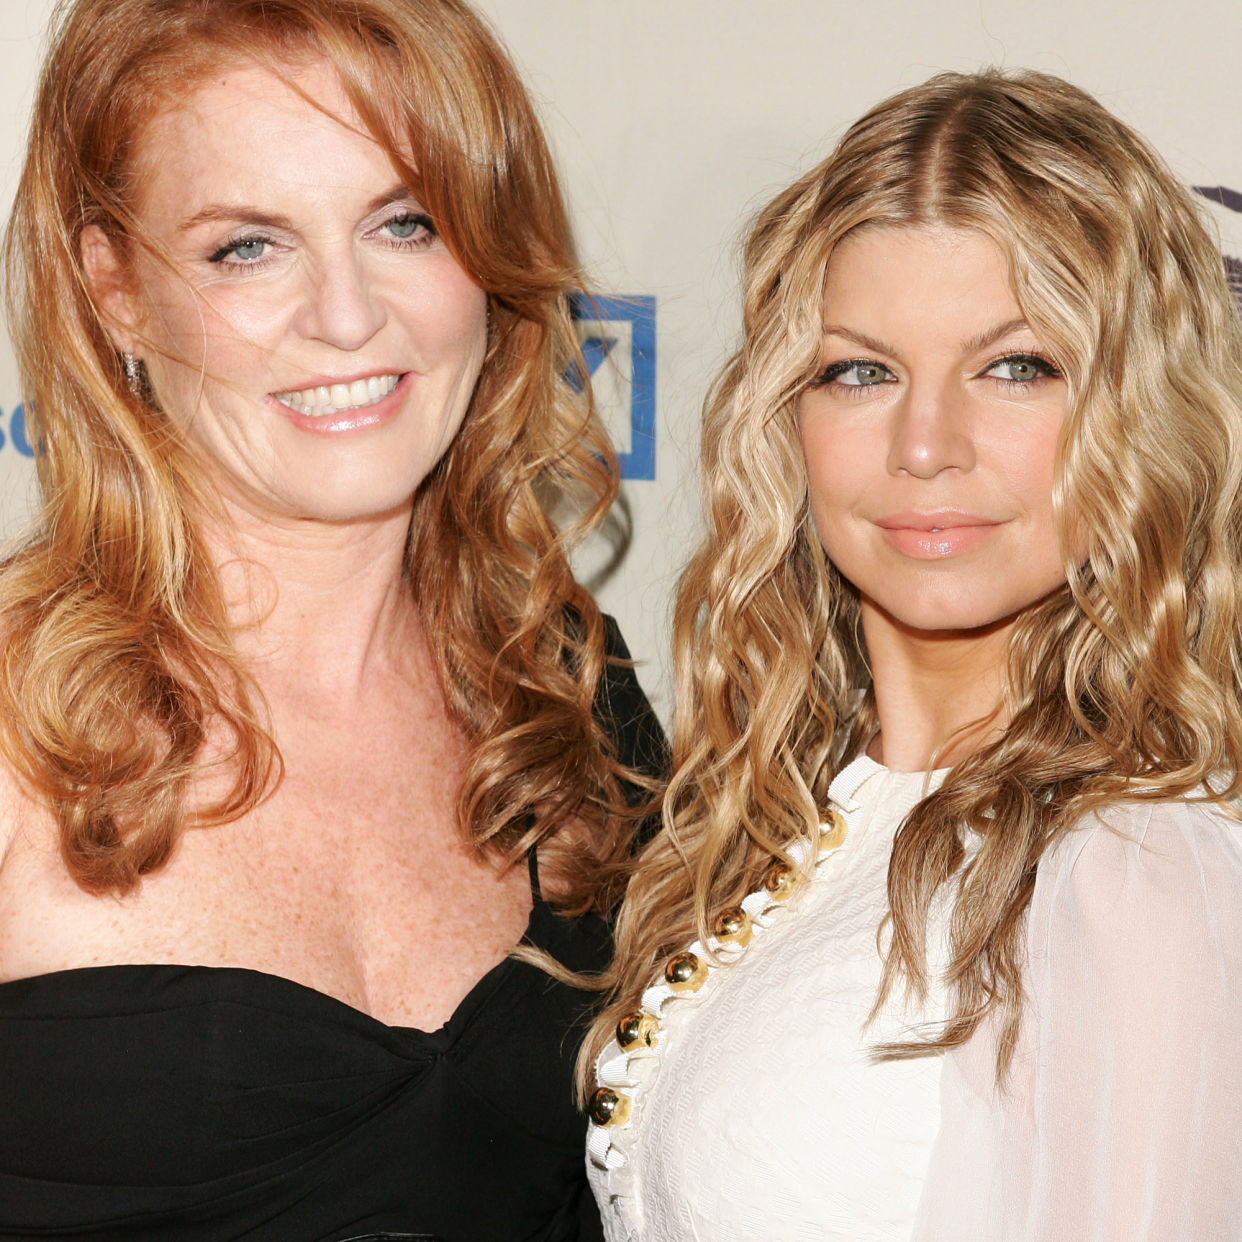  Duchess of York Sarah Ferguson and singer Fergie arrive at the 2007 Cipriani Wall Street Concert Series on May 17, 2007 in New York City 